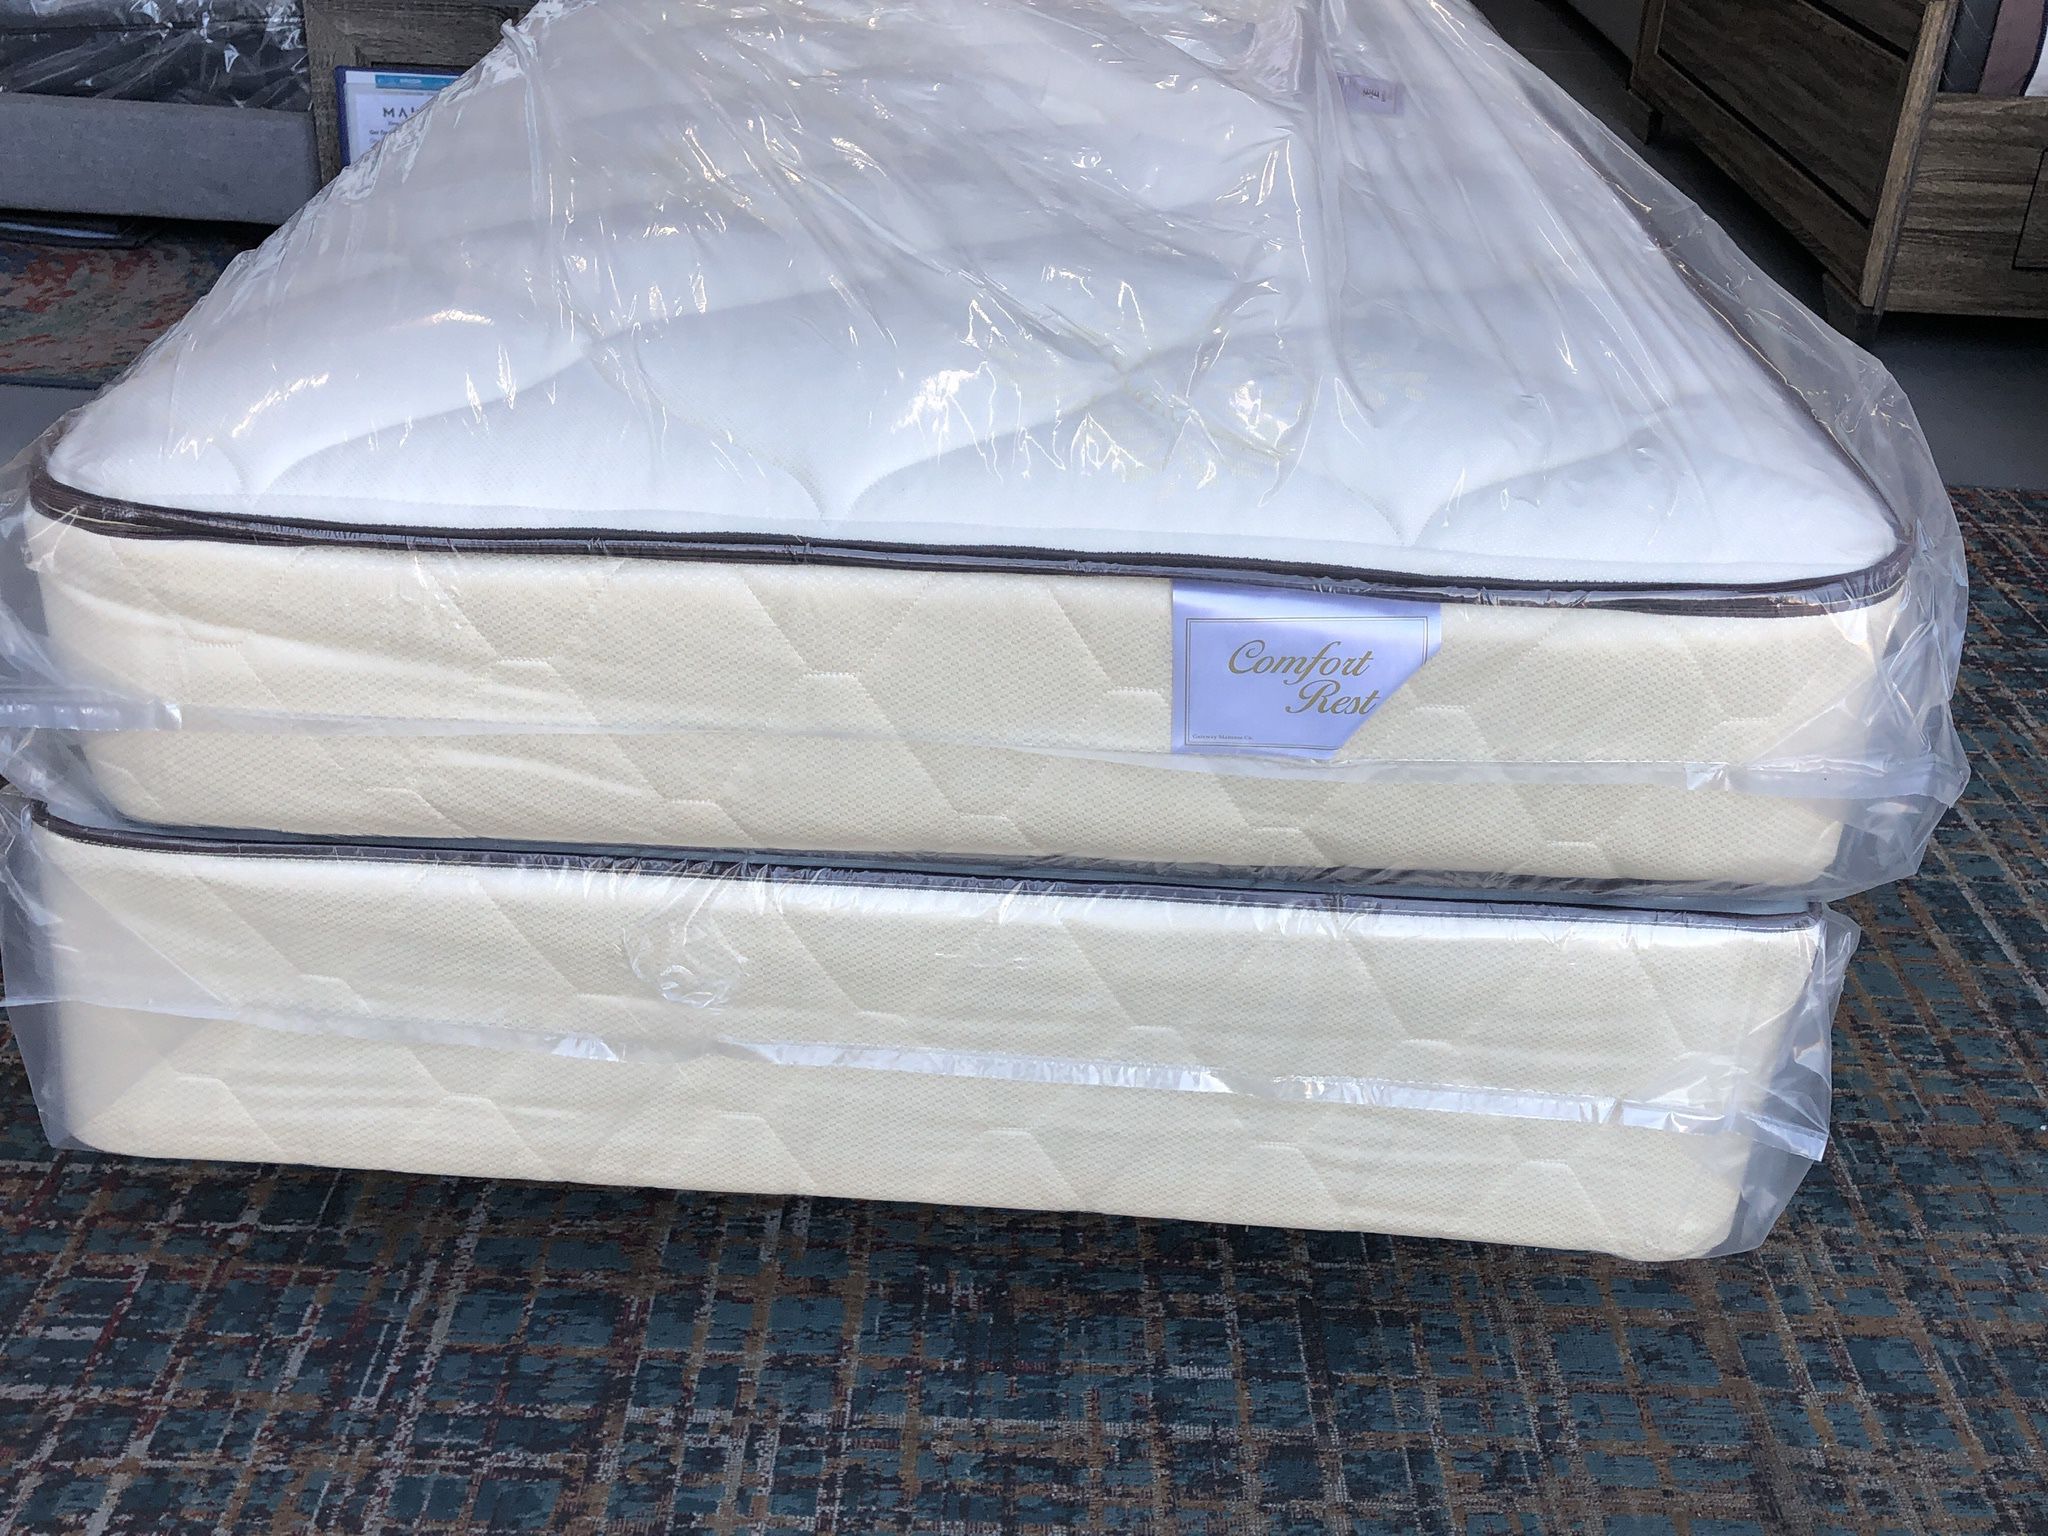 Get A Mattress Or Mattress And Box Spring Best Prices! King Queen Full Twin From 